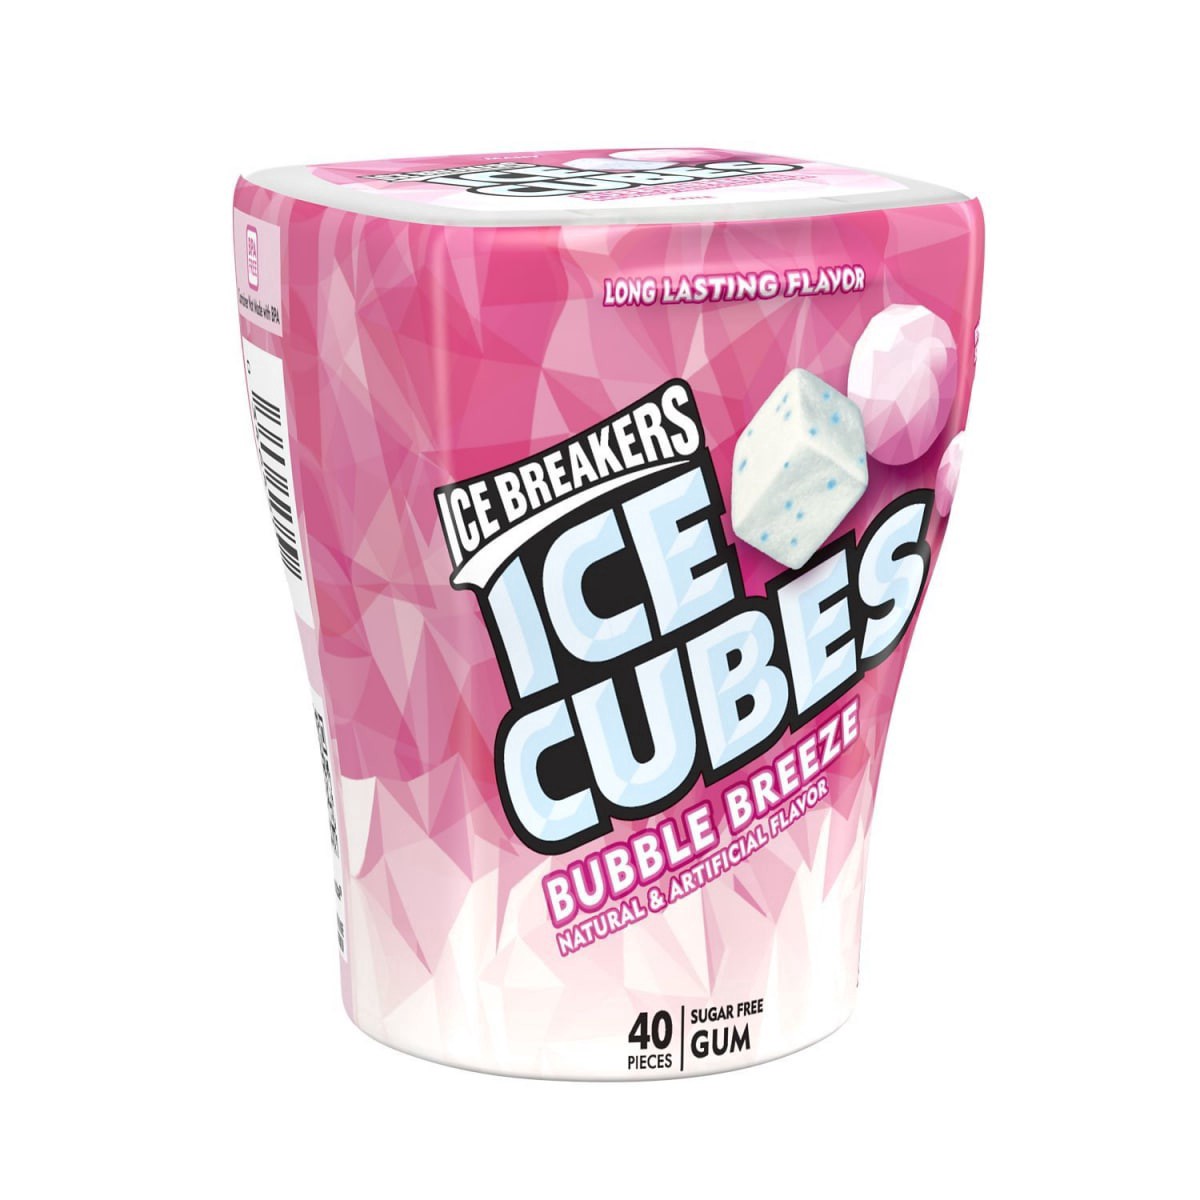 slide 1 of 4, Ice Breakers Ice Cubes Bubble Breeze Sugar Free Chewing Gum Bottle, 3.24 oz (40 Pieces), 3.24 oz